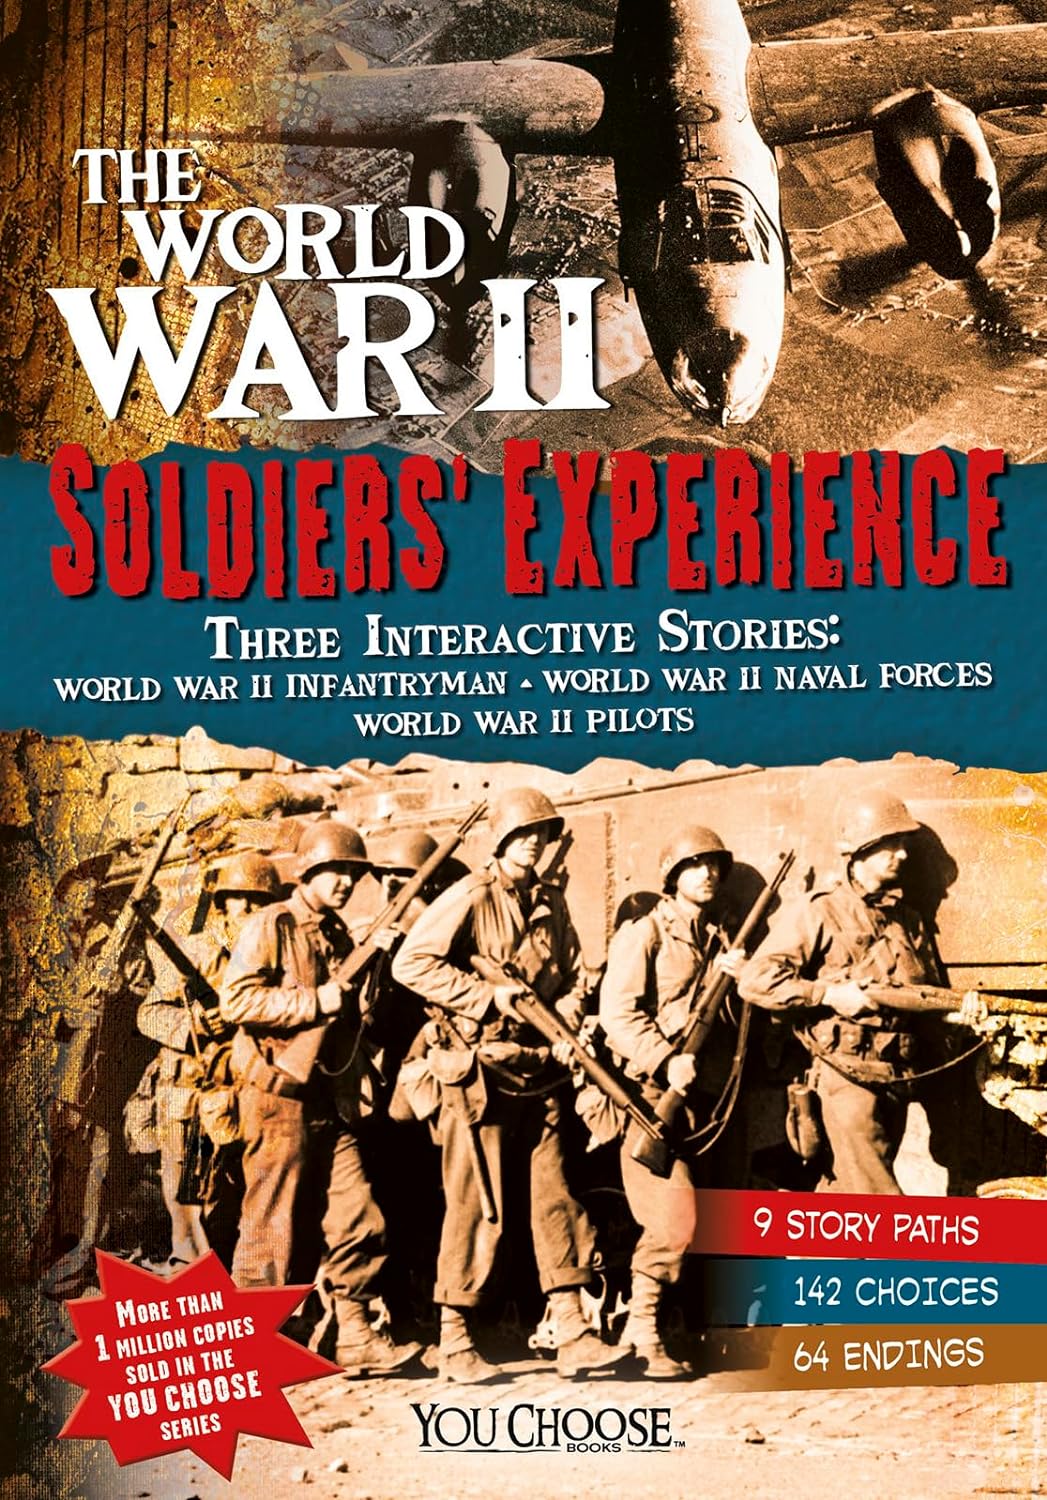 The WWII Soldier's Experience